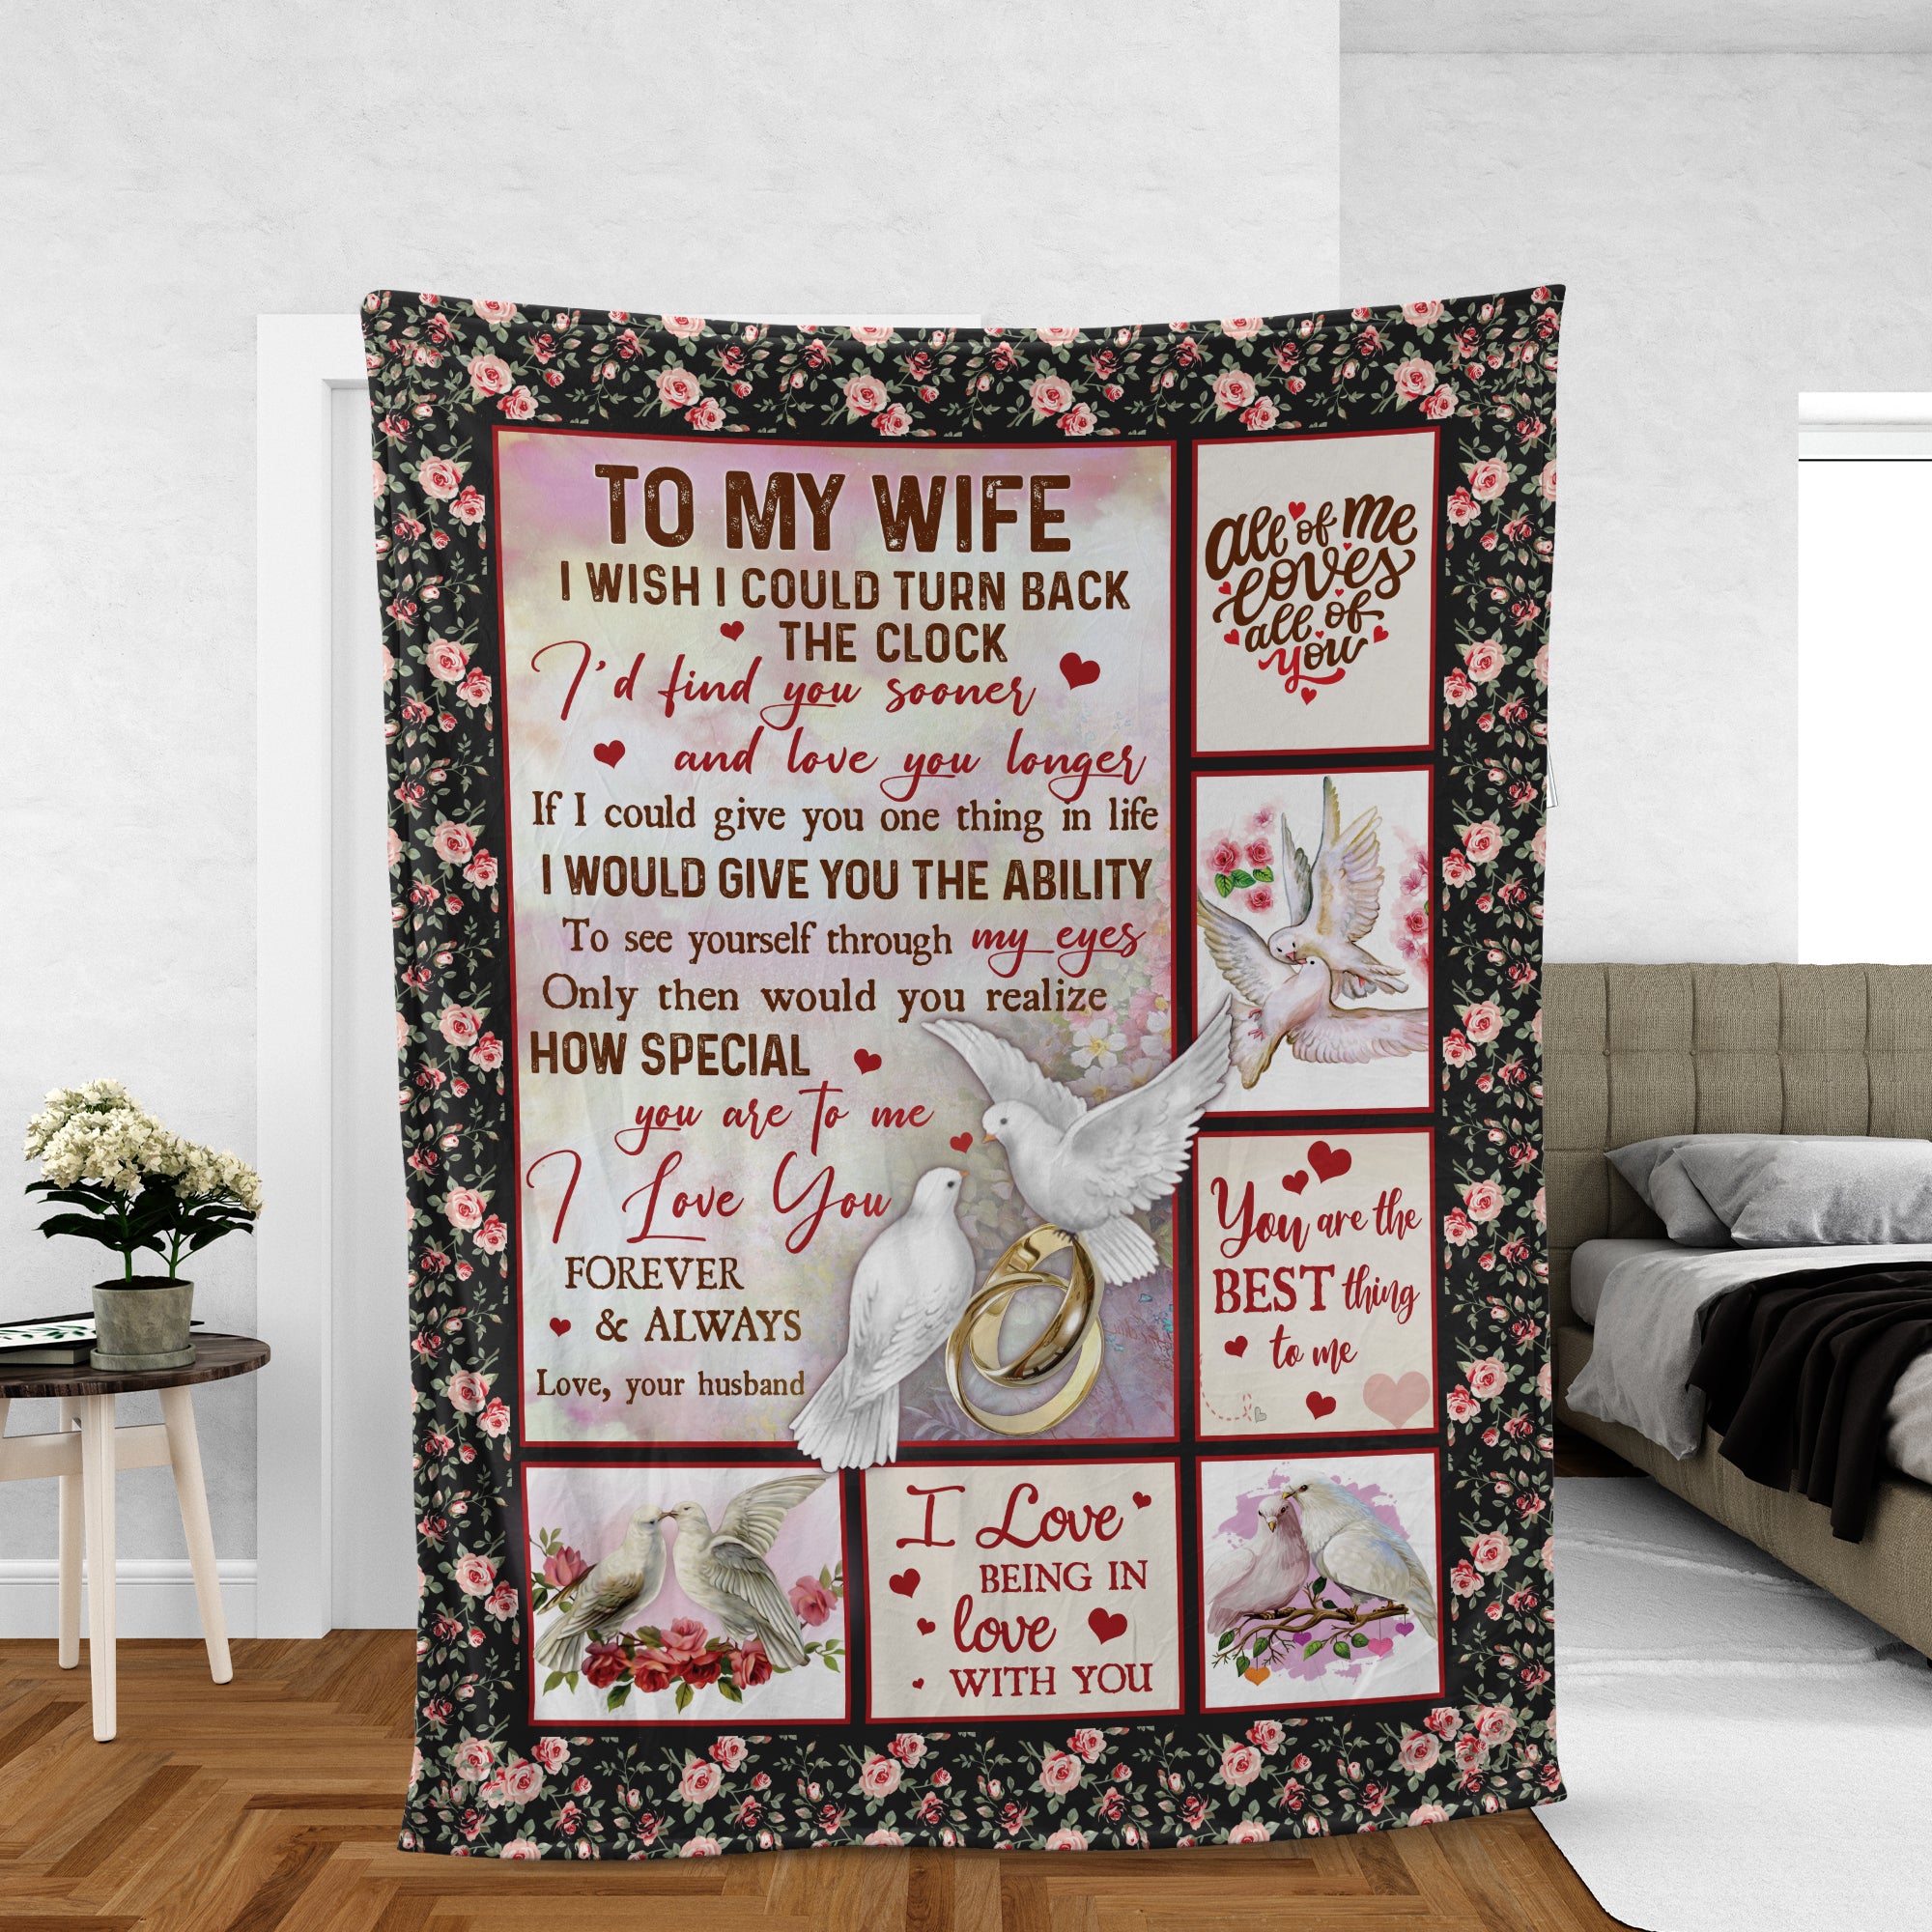 Couple Blanket, To My Wife Blanket, Valentine's Day Gift, Gifts For Wife From Husband, Doves Blanket - Wedding Rings, You Are The Best Thing To Me